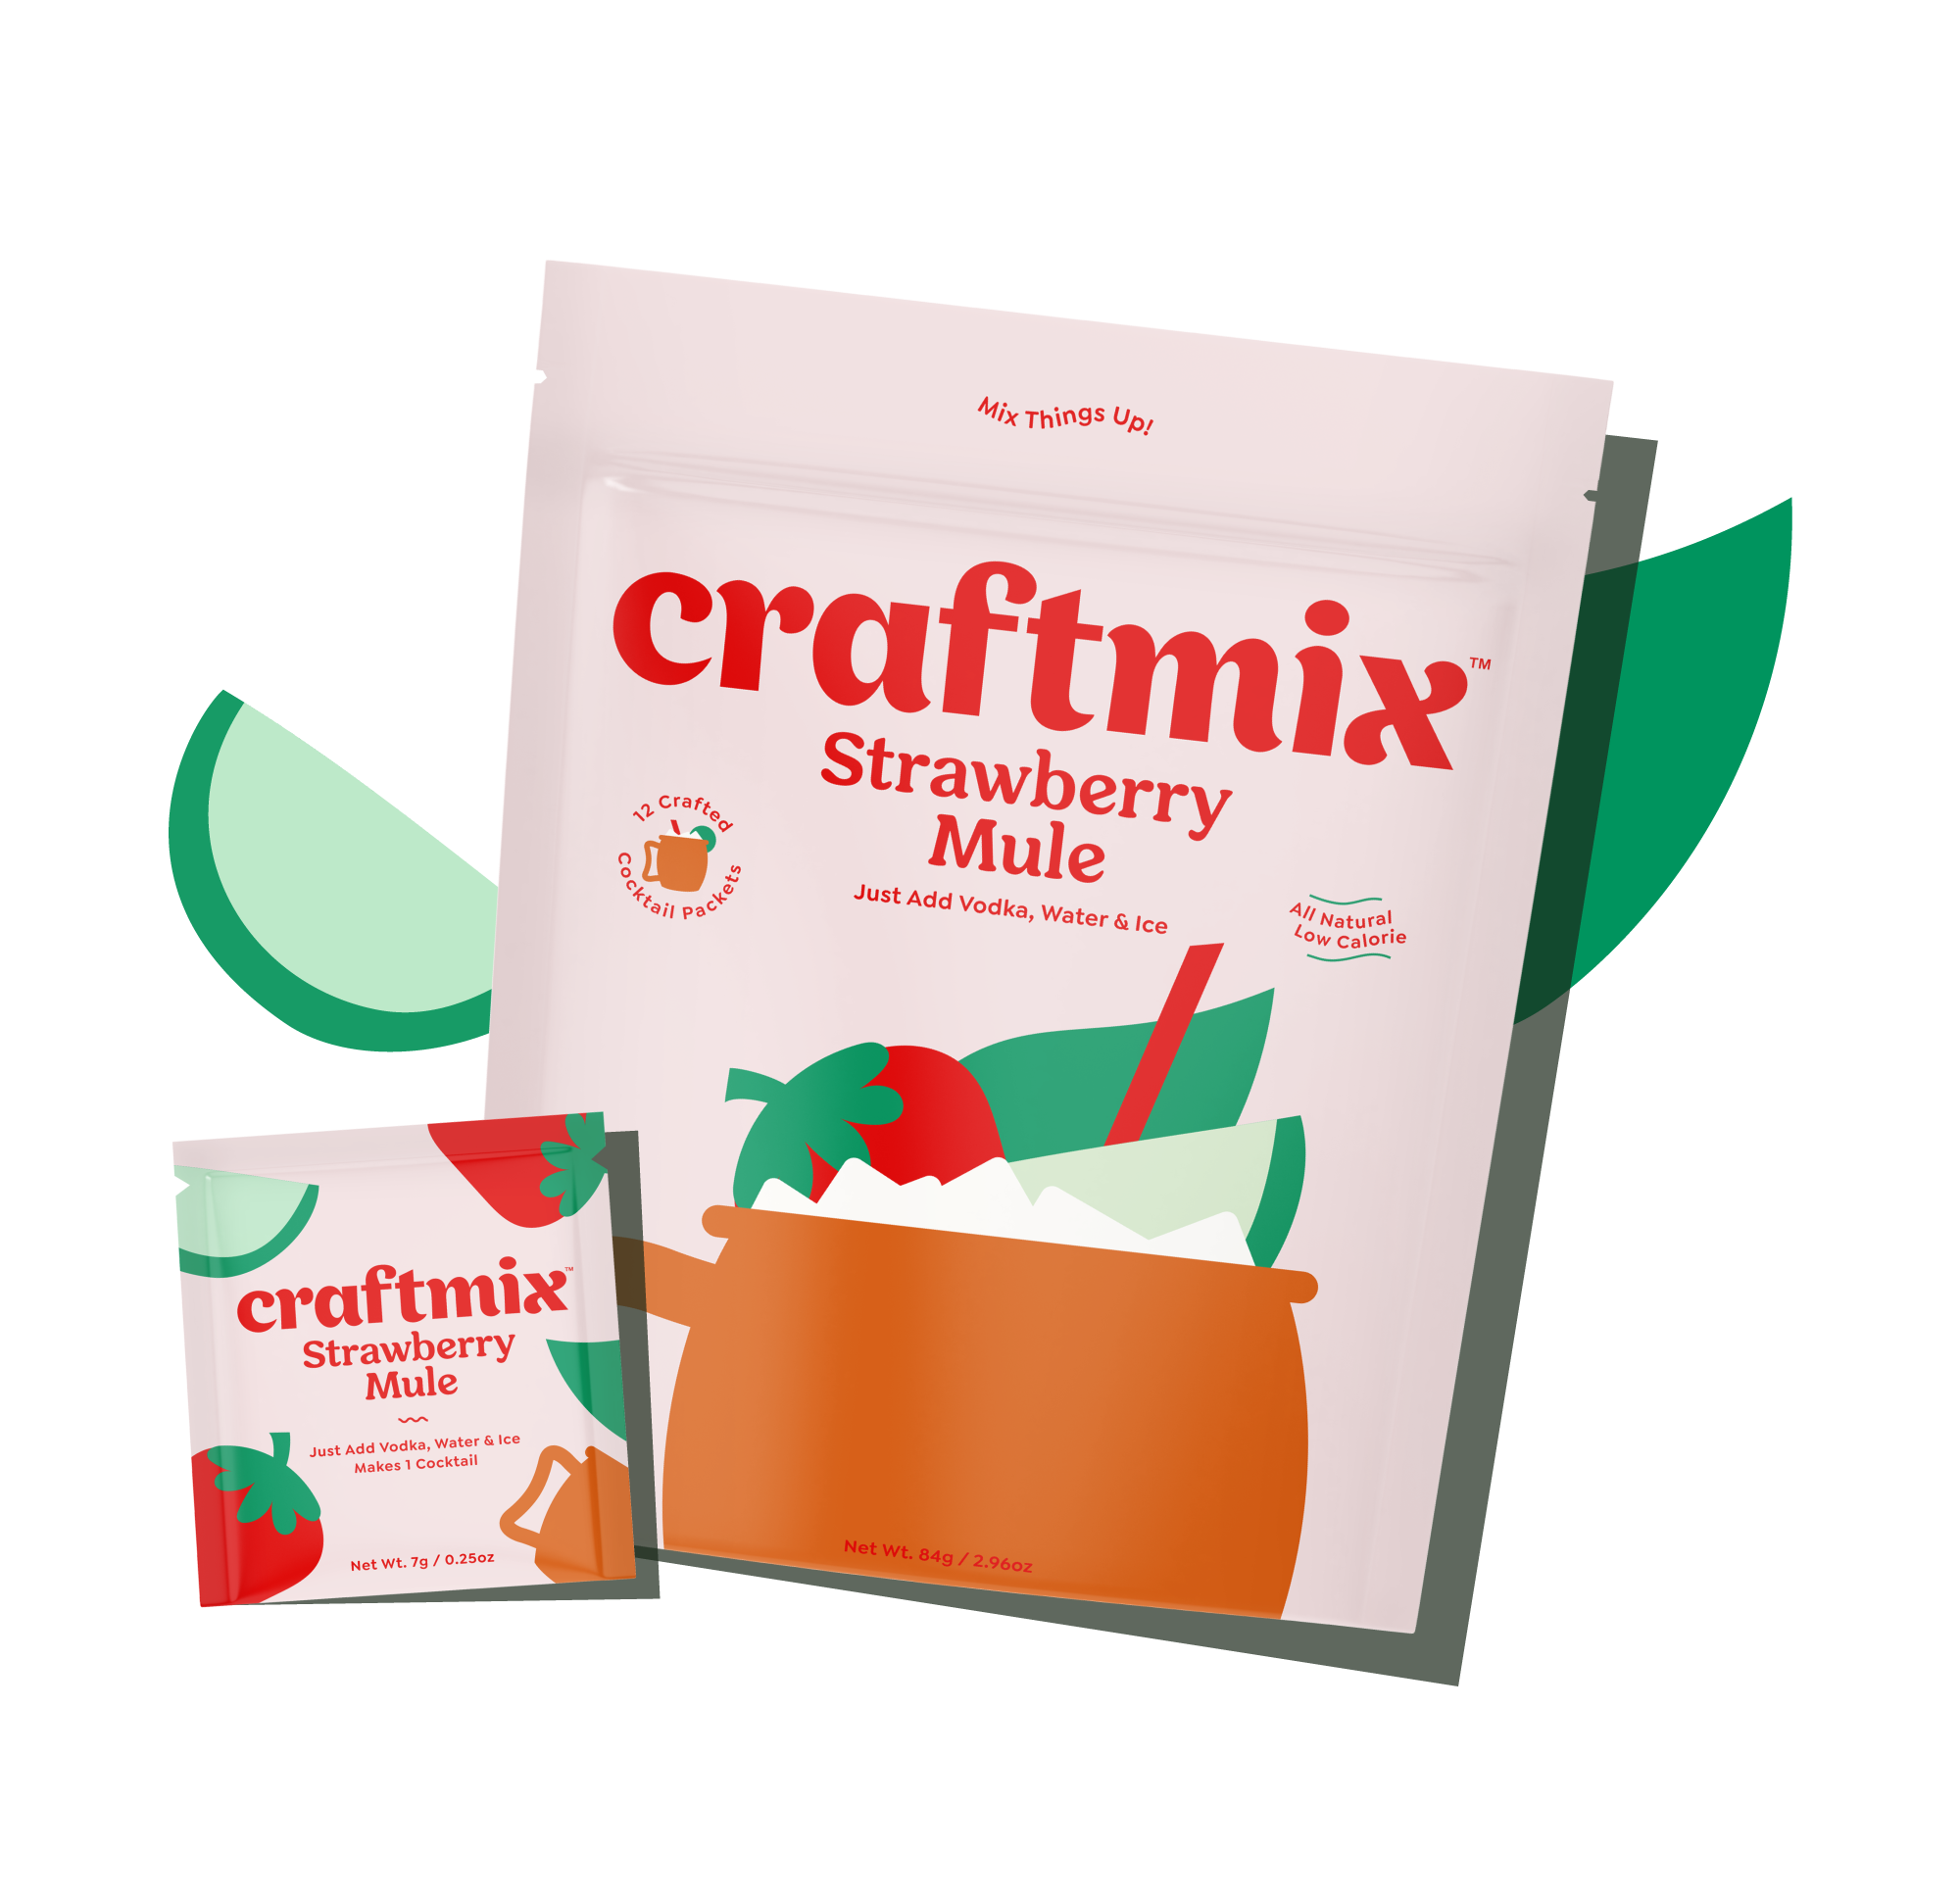 Craftmix Classic Margarita, Makes 12 Drinks, Skinny Margarita Cocktail Mixers - Mocktail Drink Mixers - Made with Real Fruit - Vegan Low-Carb